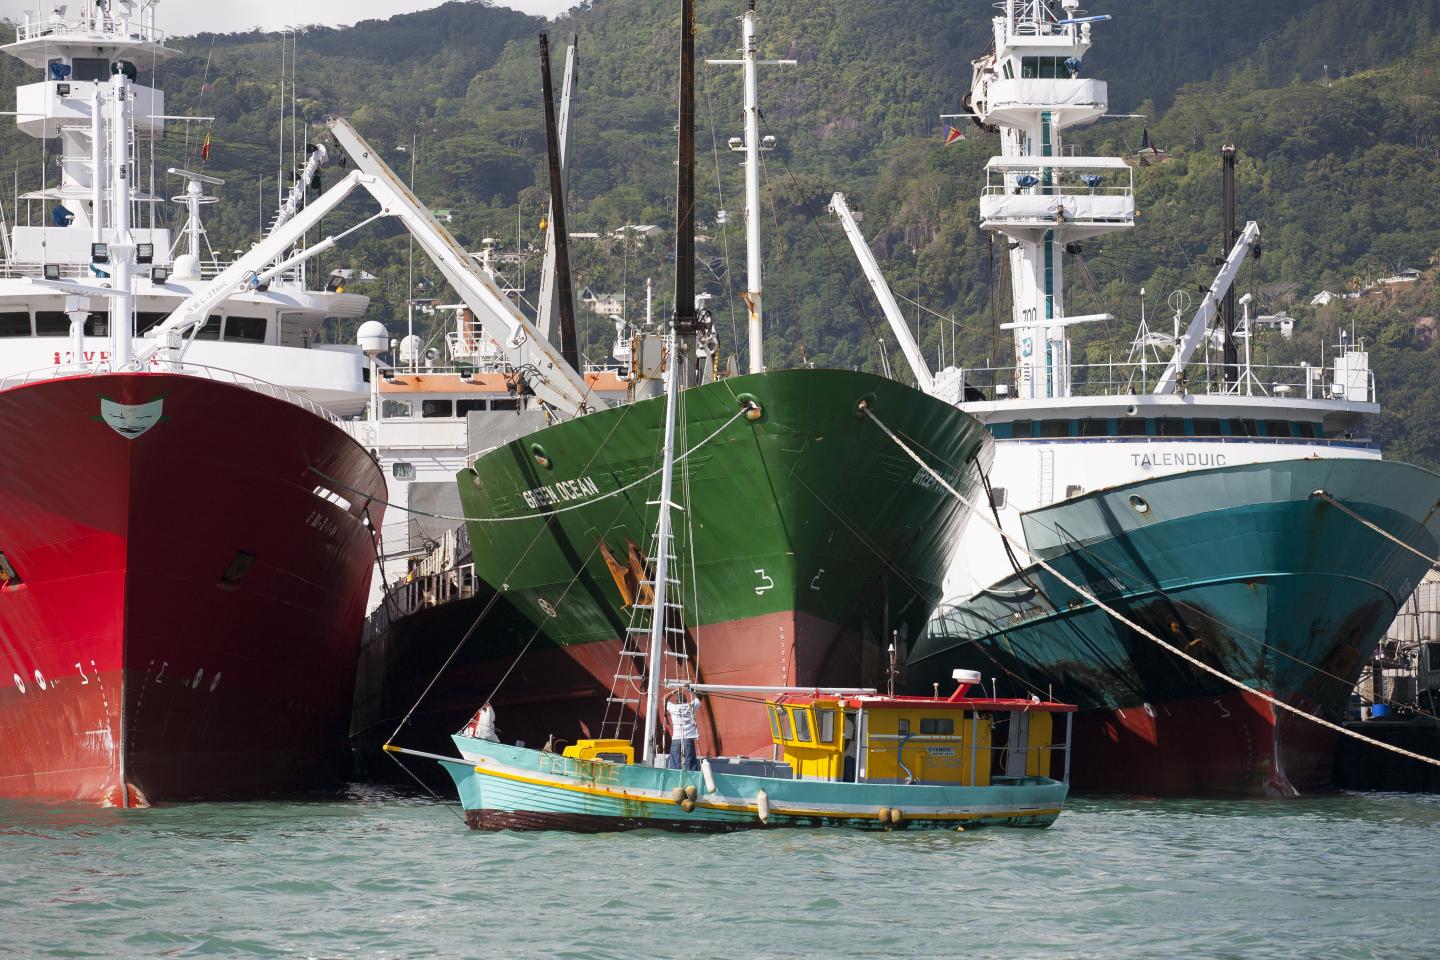 In Seychelles, artisanal and industrial fisheries coexist.